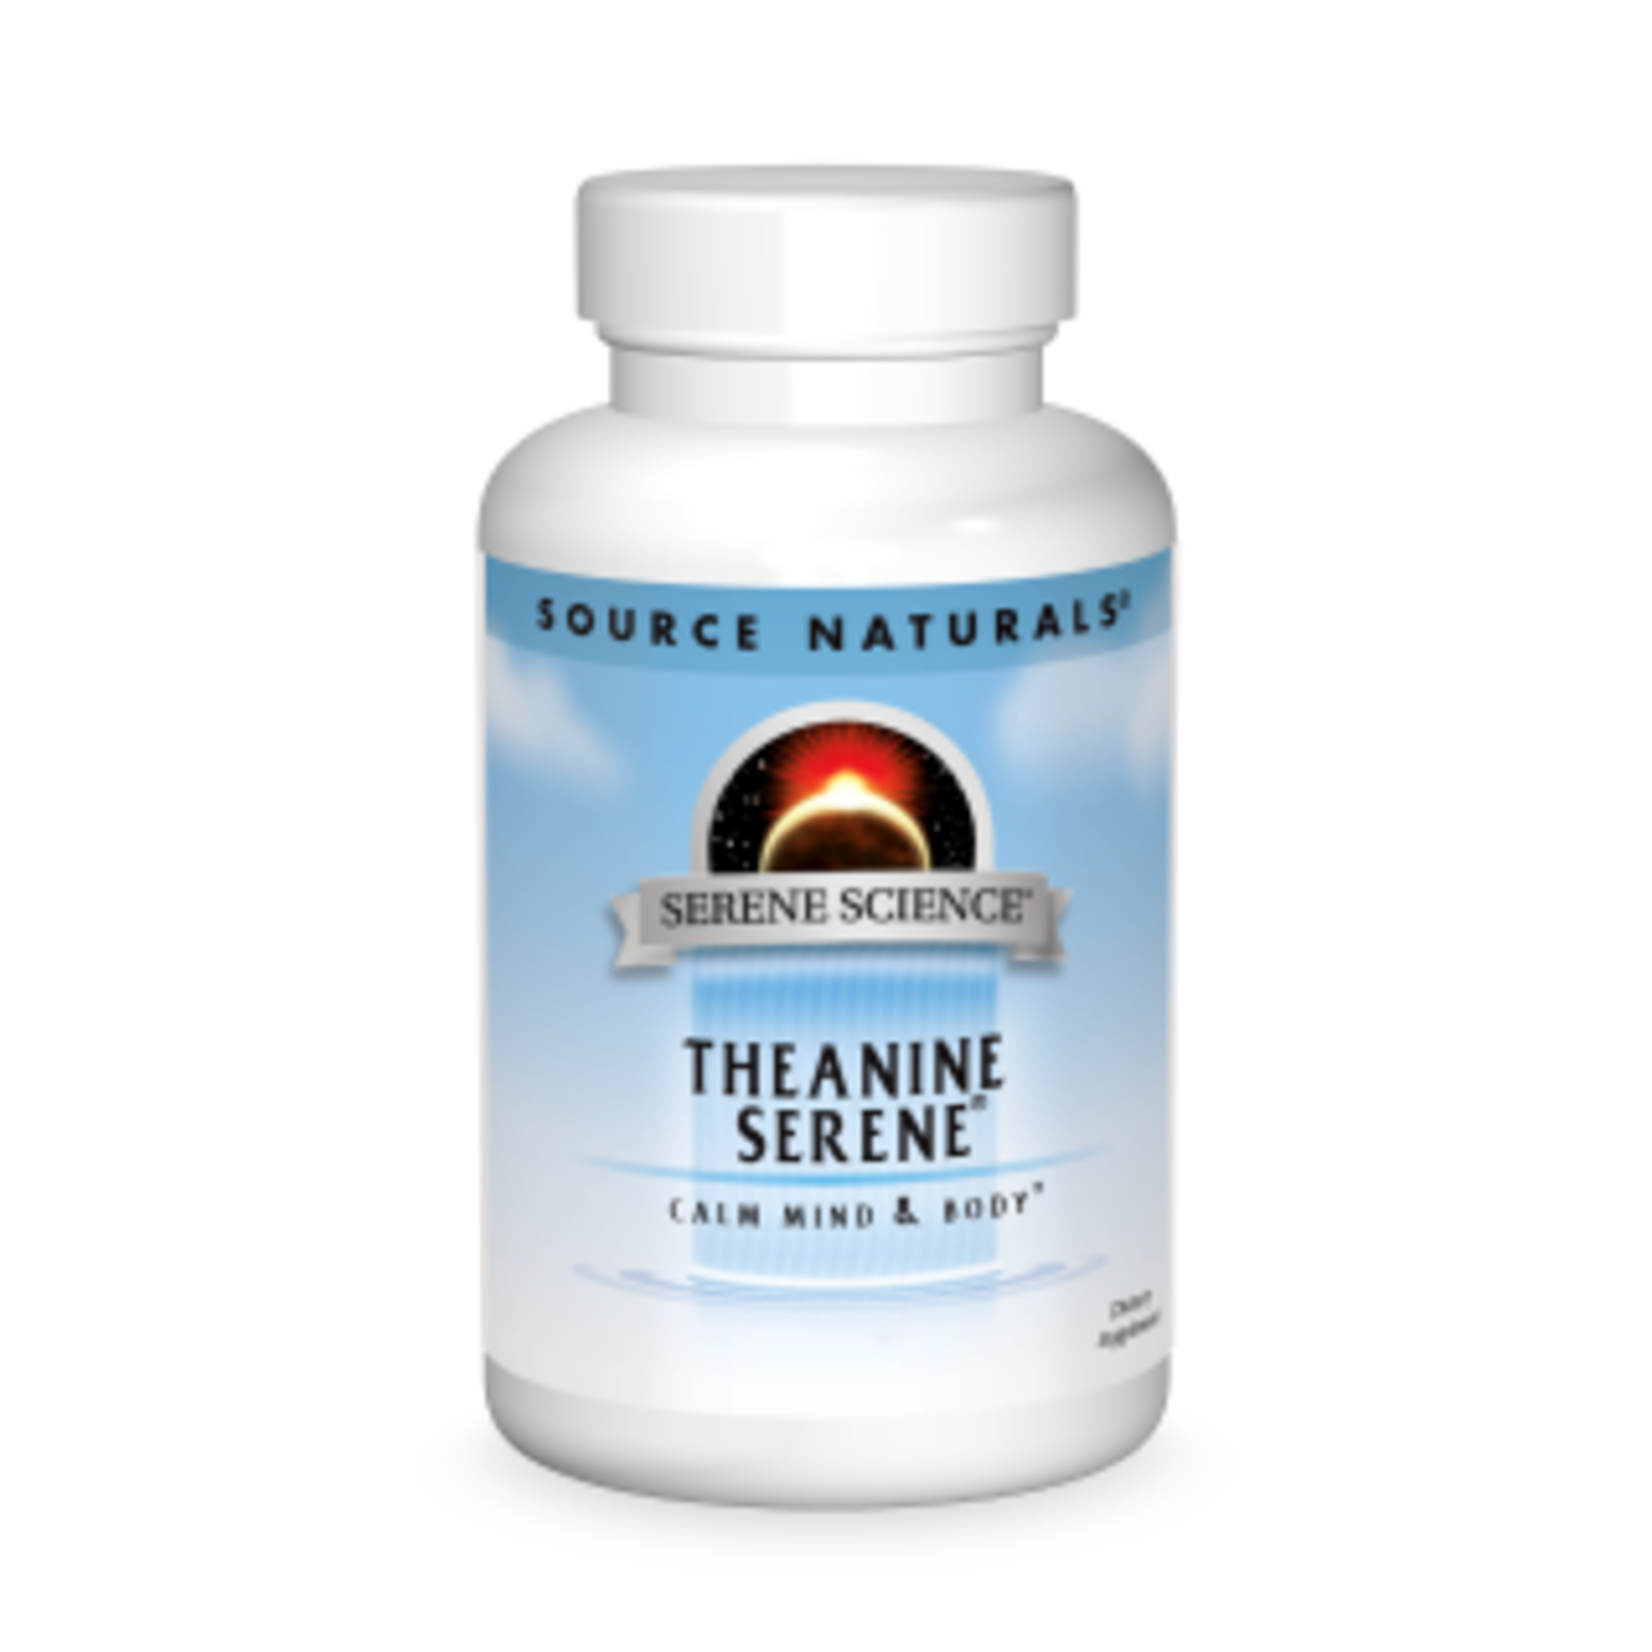 Source Naturals Source Naturals - Theanine Serine - 120 Tablets